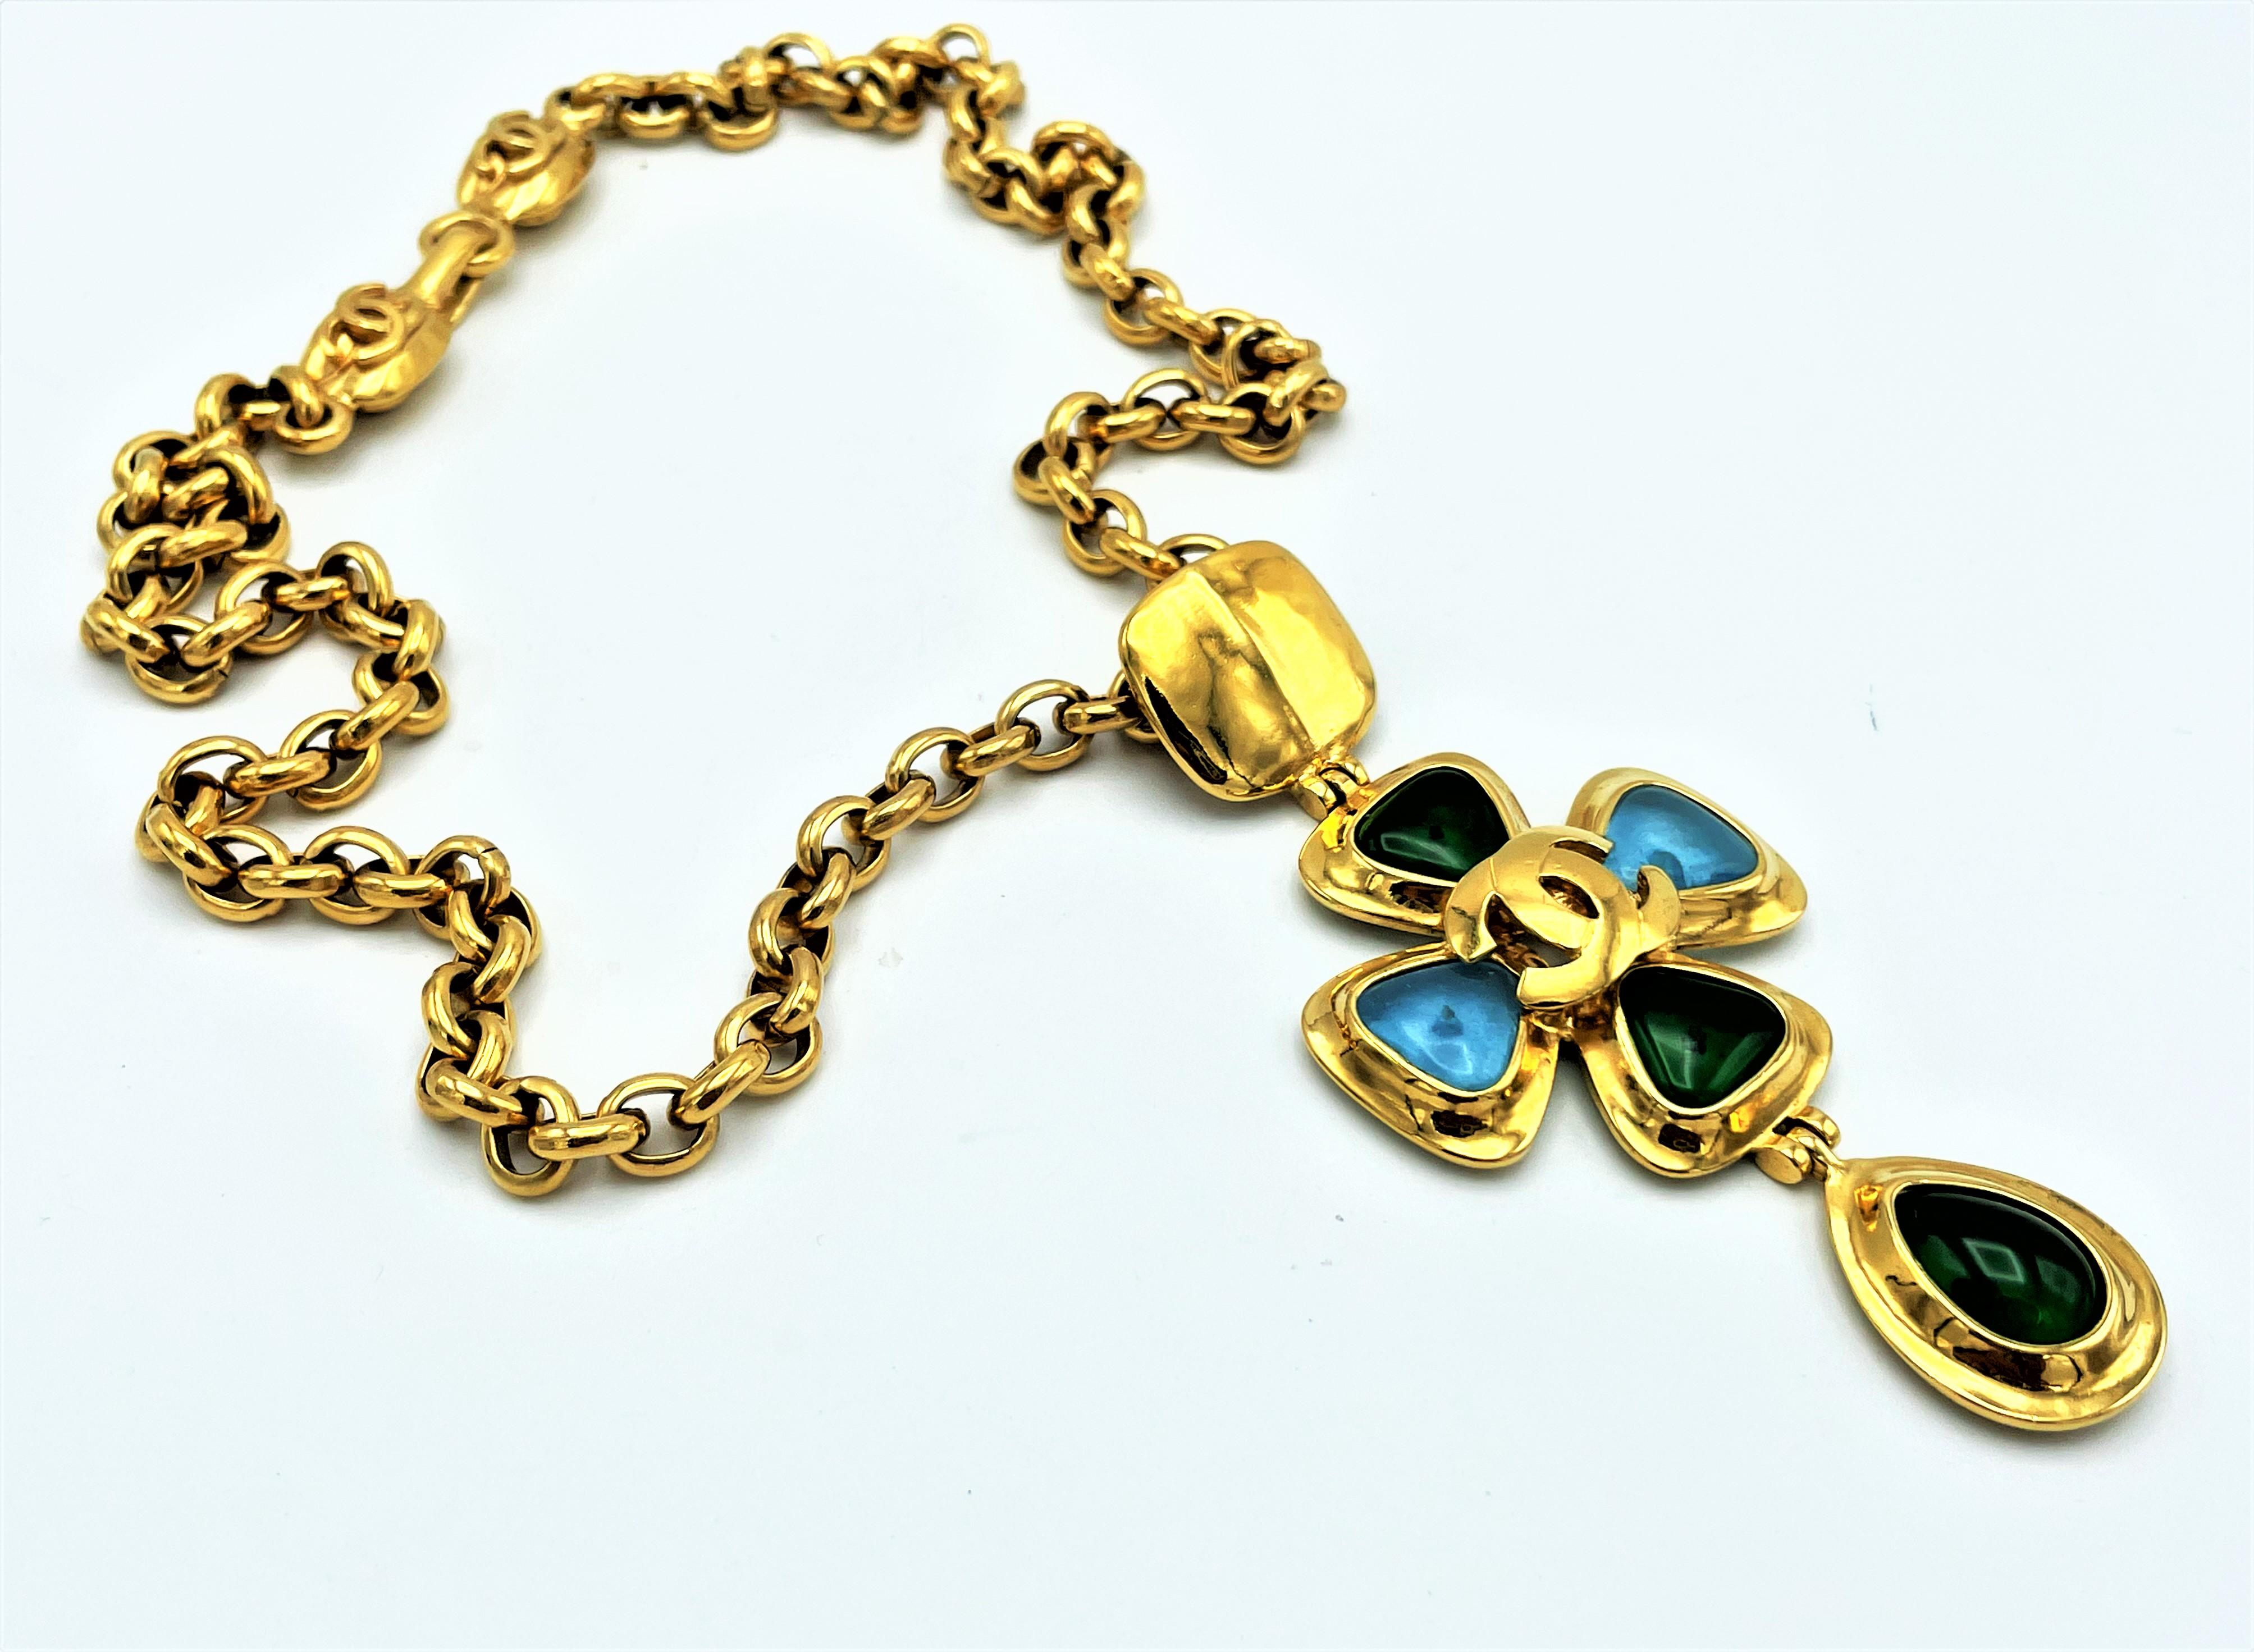 Vintage Chanel link chain with cross pendant filled with Gripoix glass, 1997  1